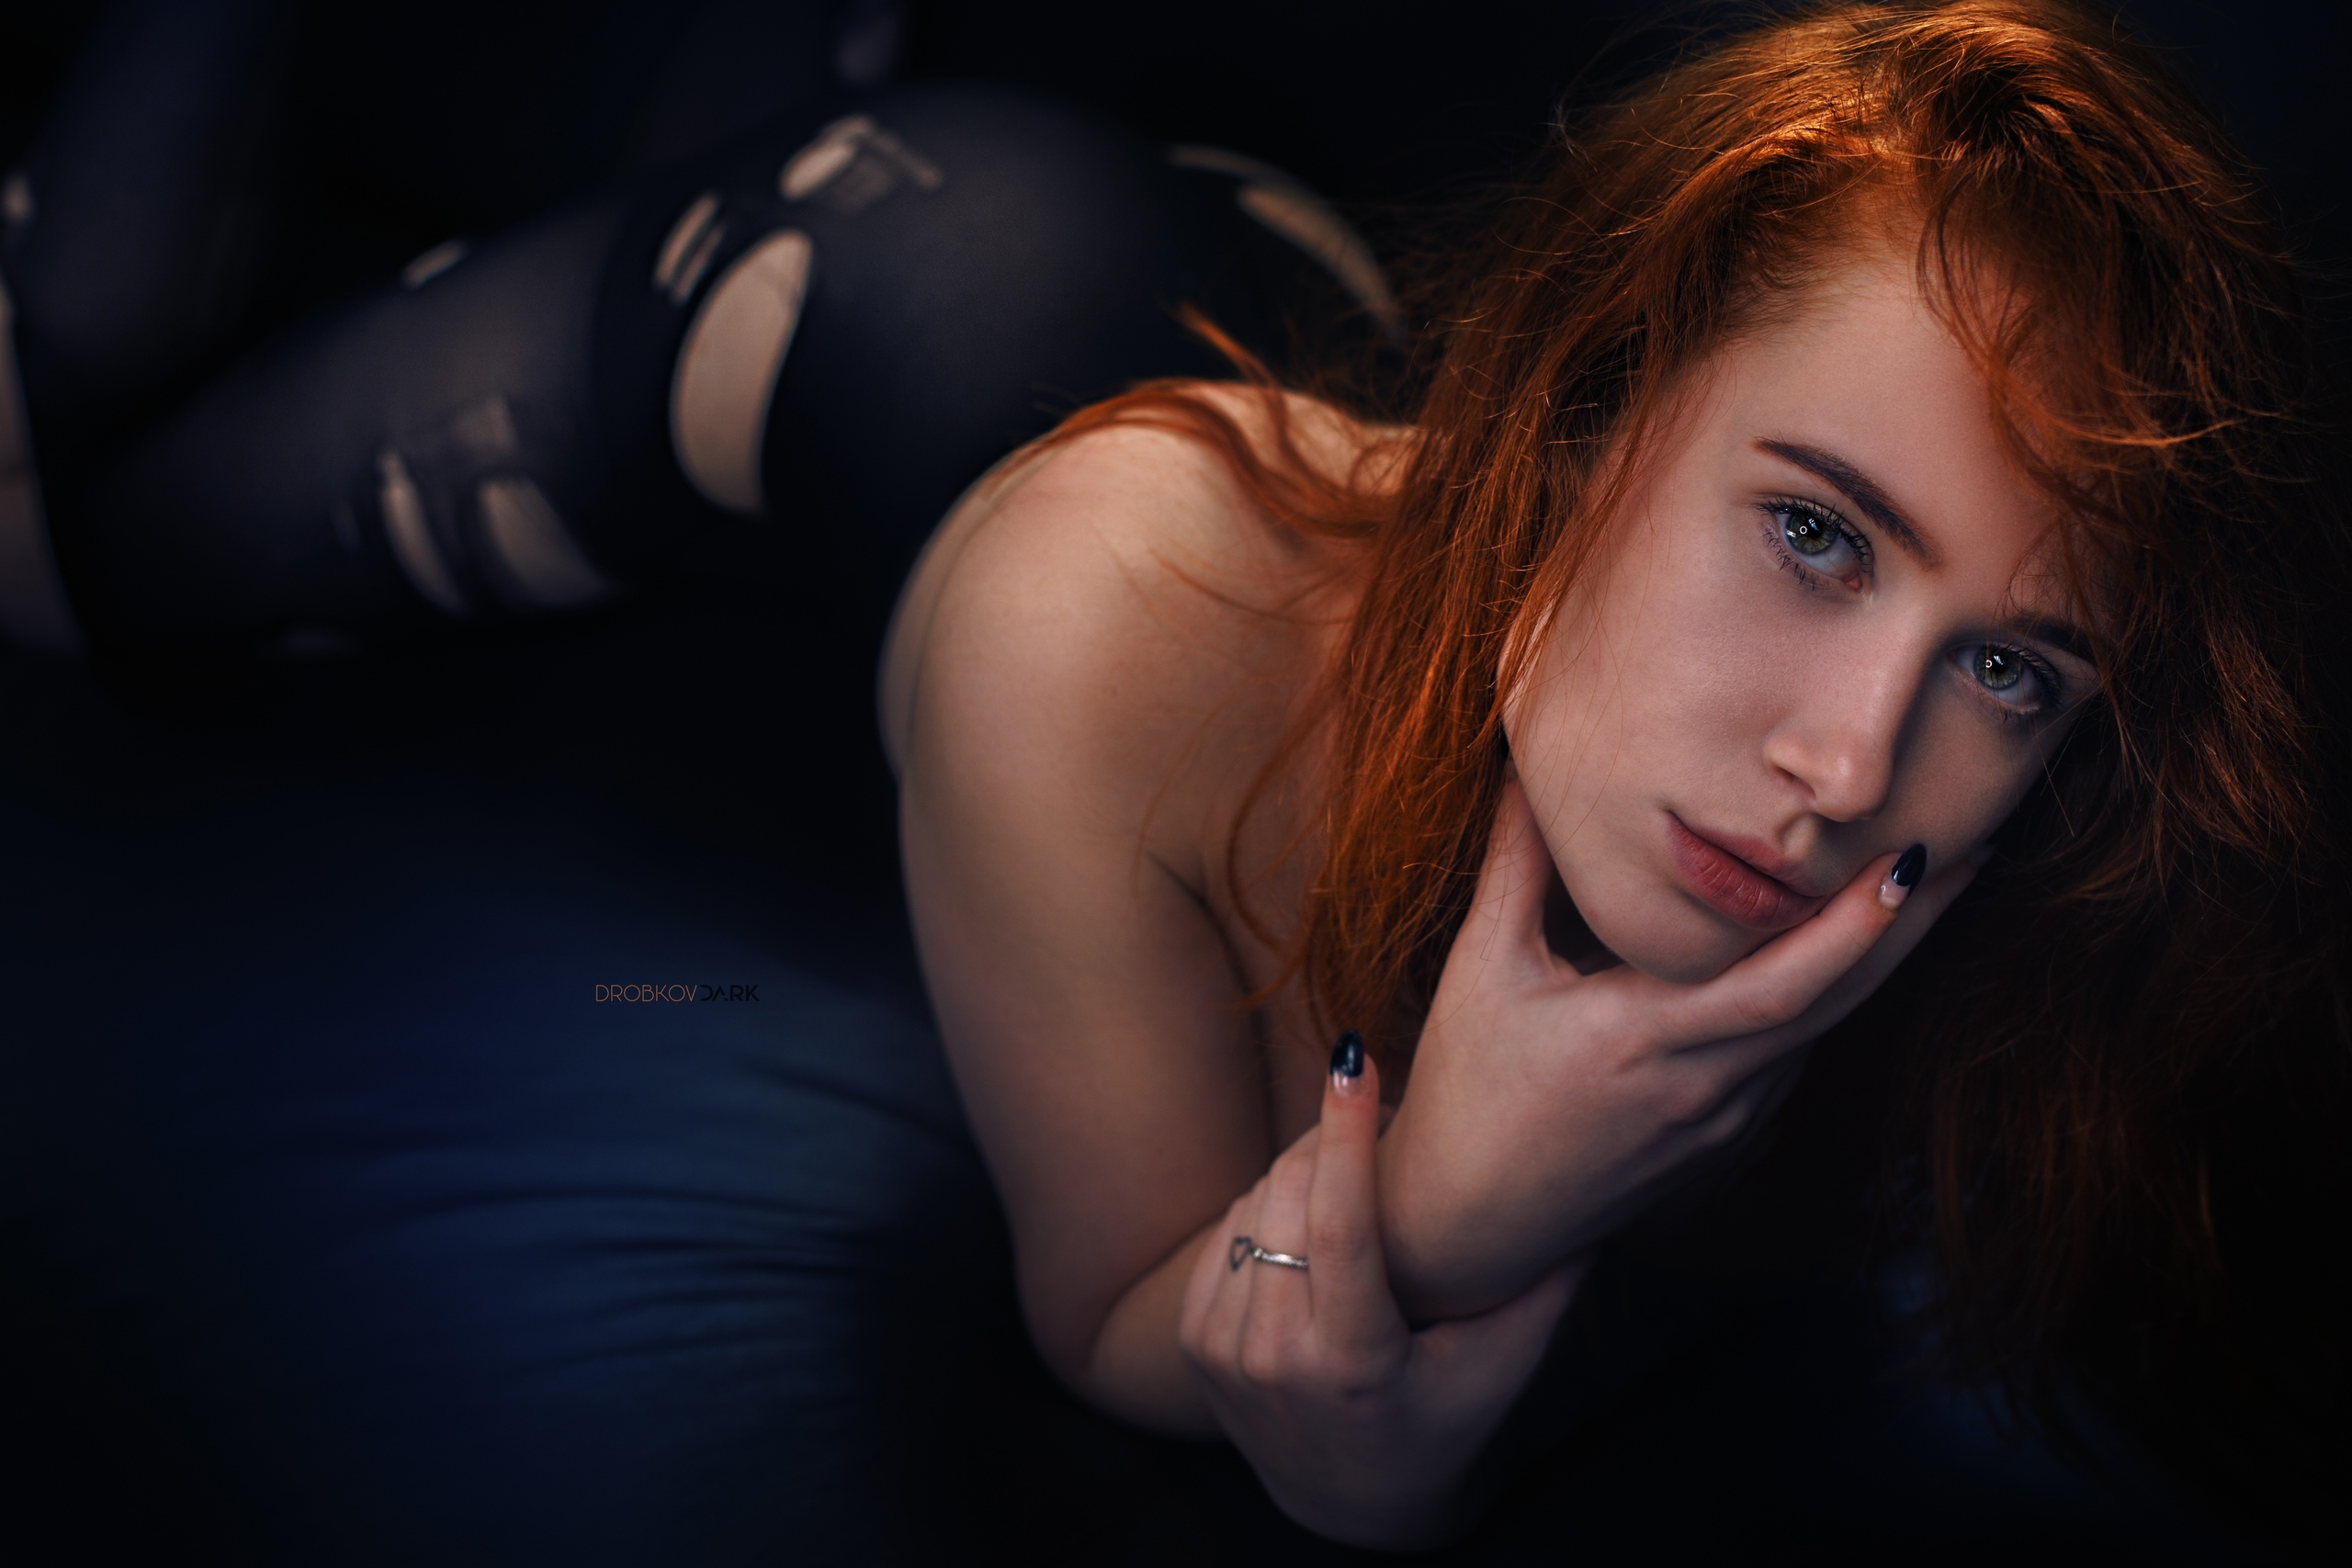 People 2560x1707 Elvira Pozdnysheva women model redhead looking at viewer touching face topless covering boobs pantyhose torn clothes lying on front couch bokeh dark painted nails indoors portrait women indoors Alexander Drobkov torn stockings